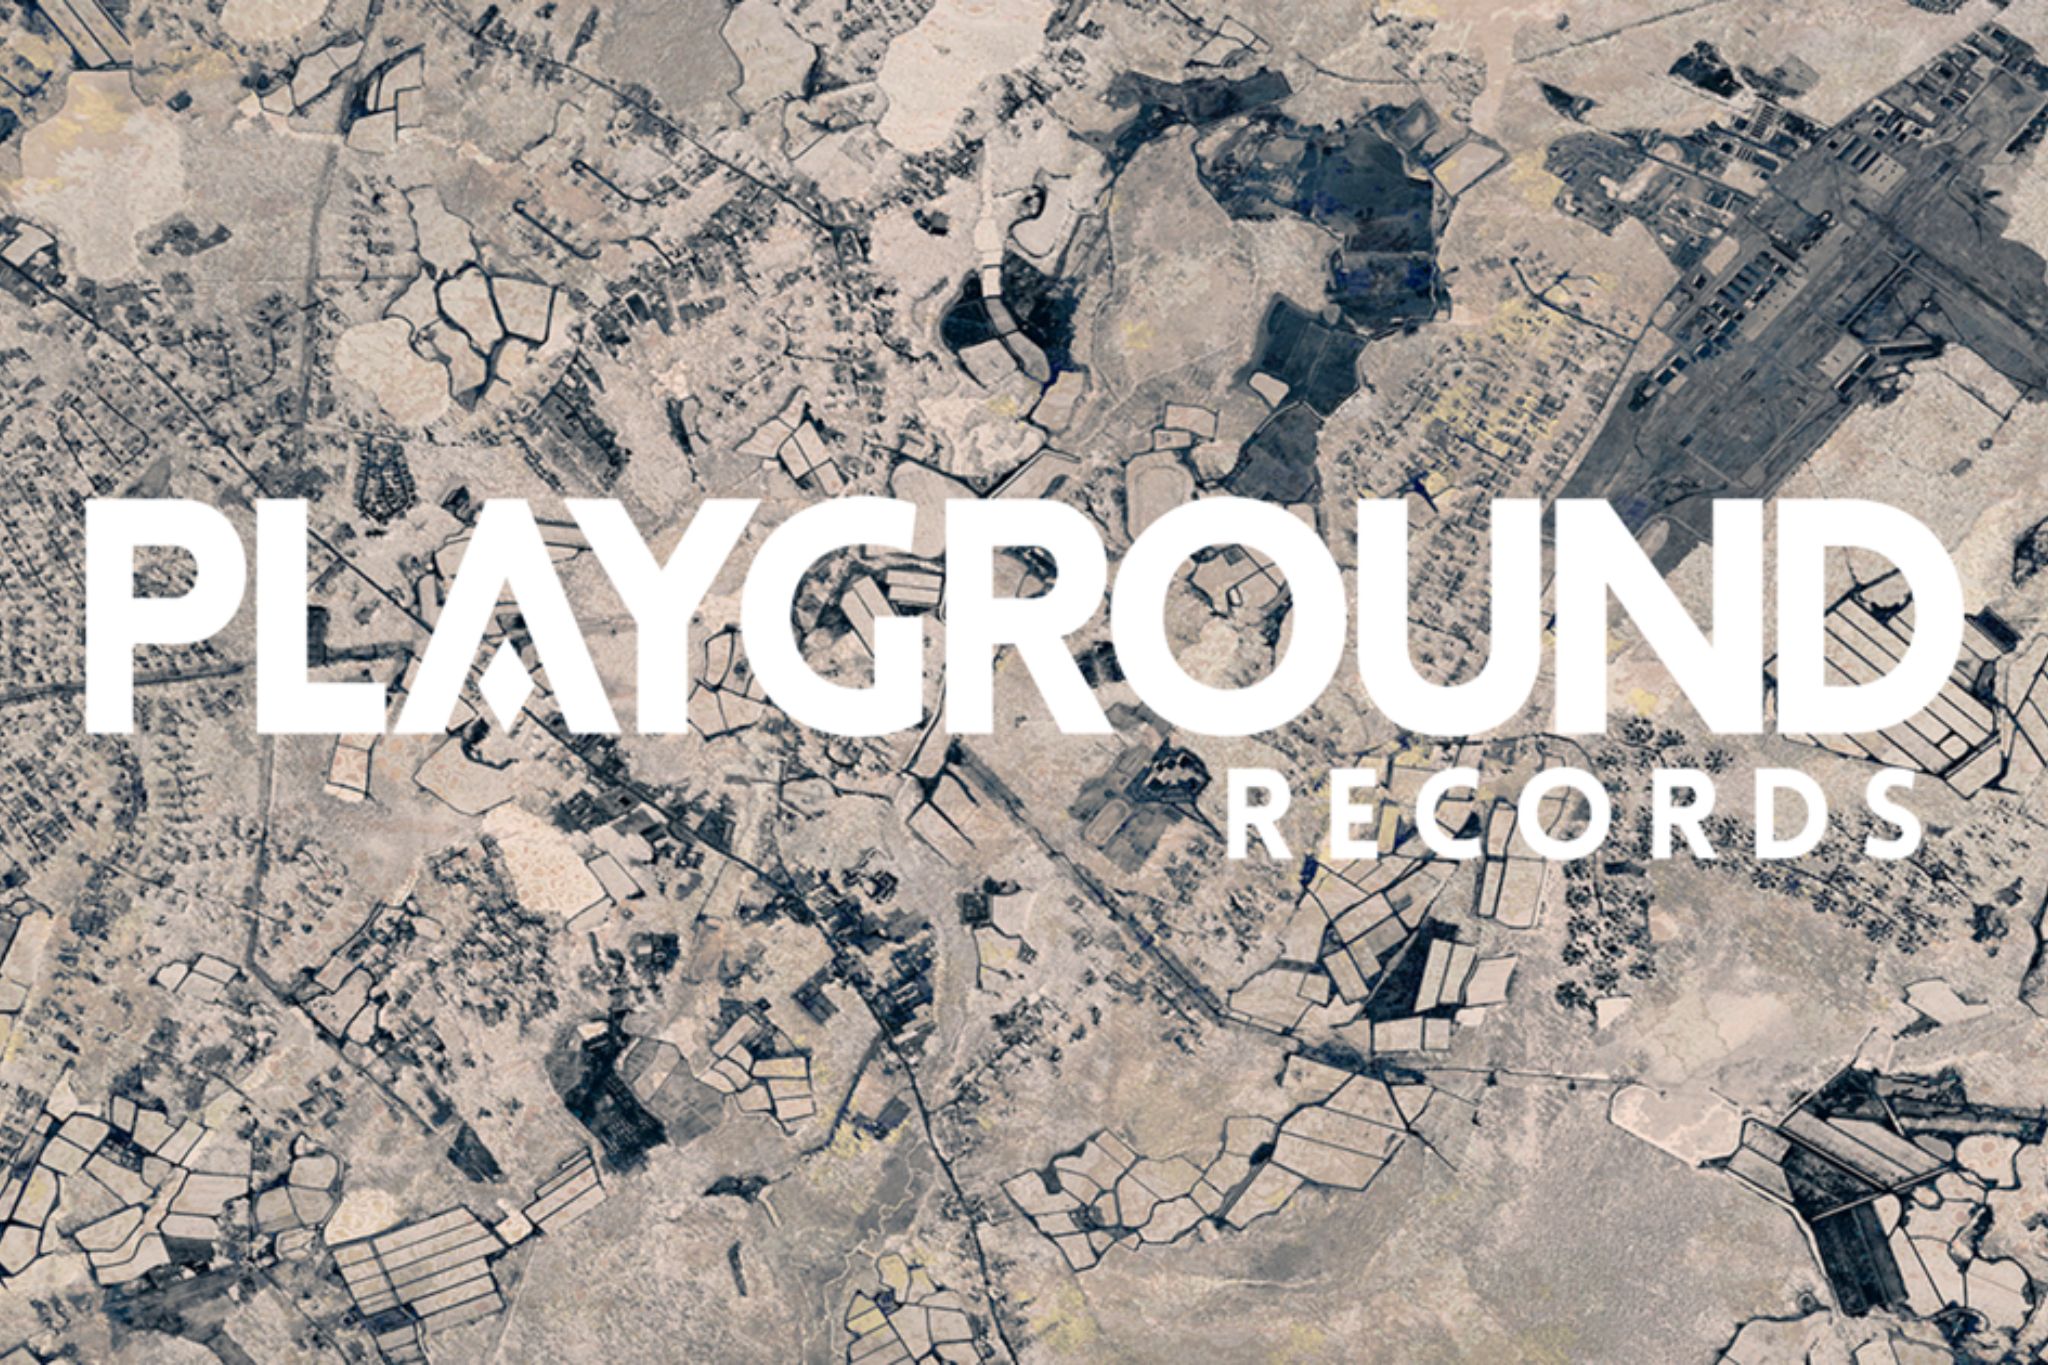 V.A. – Playground 10 Years Compilation.